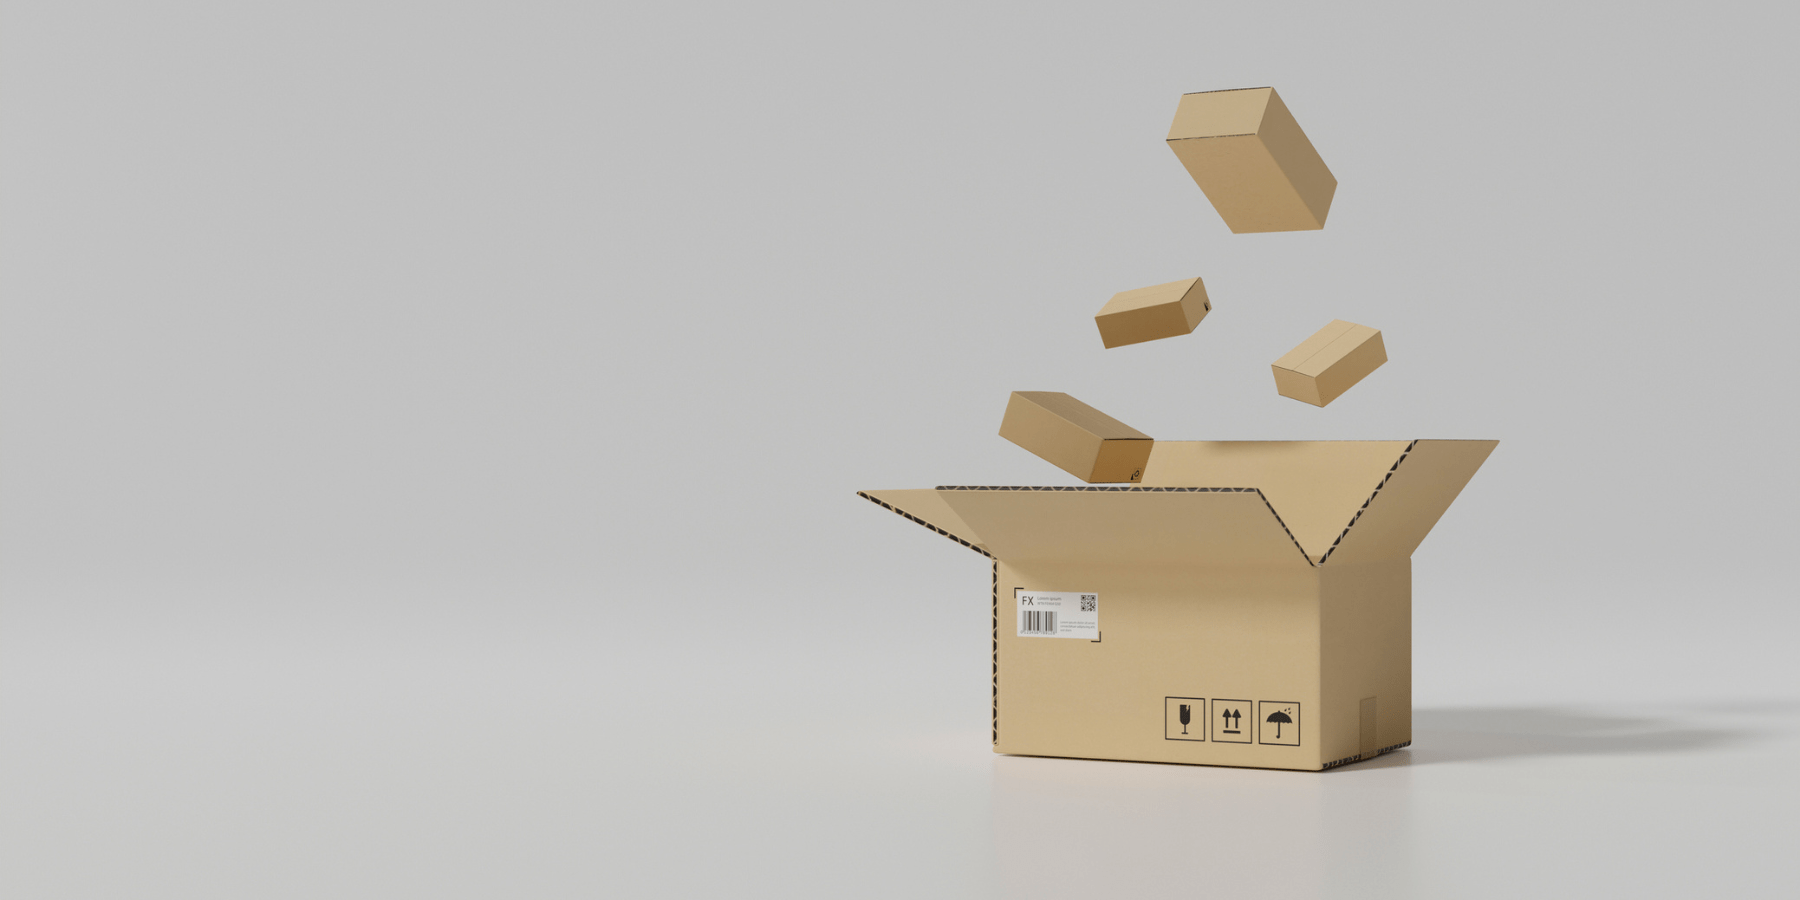 Dimensional Packing boxes within boxes